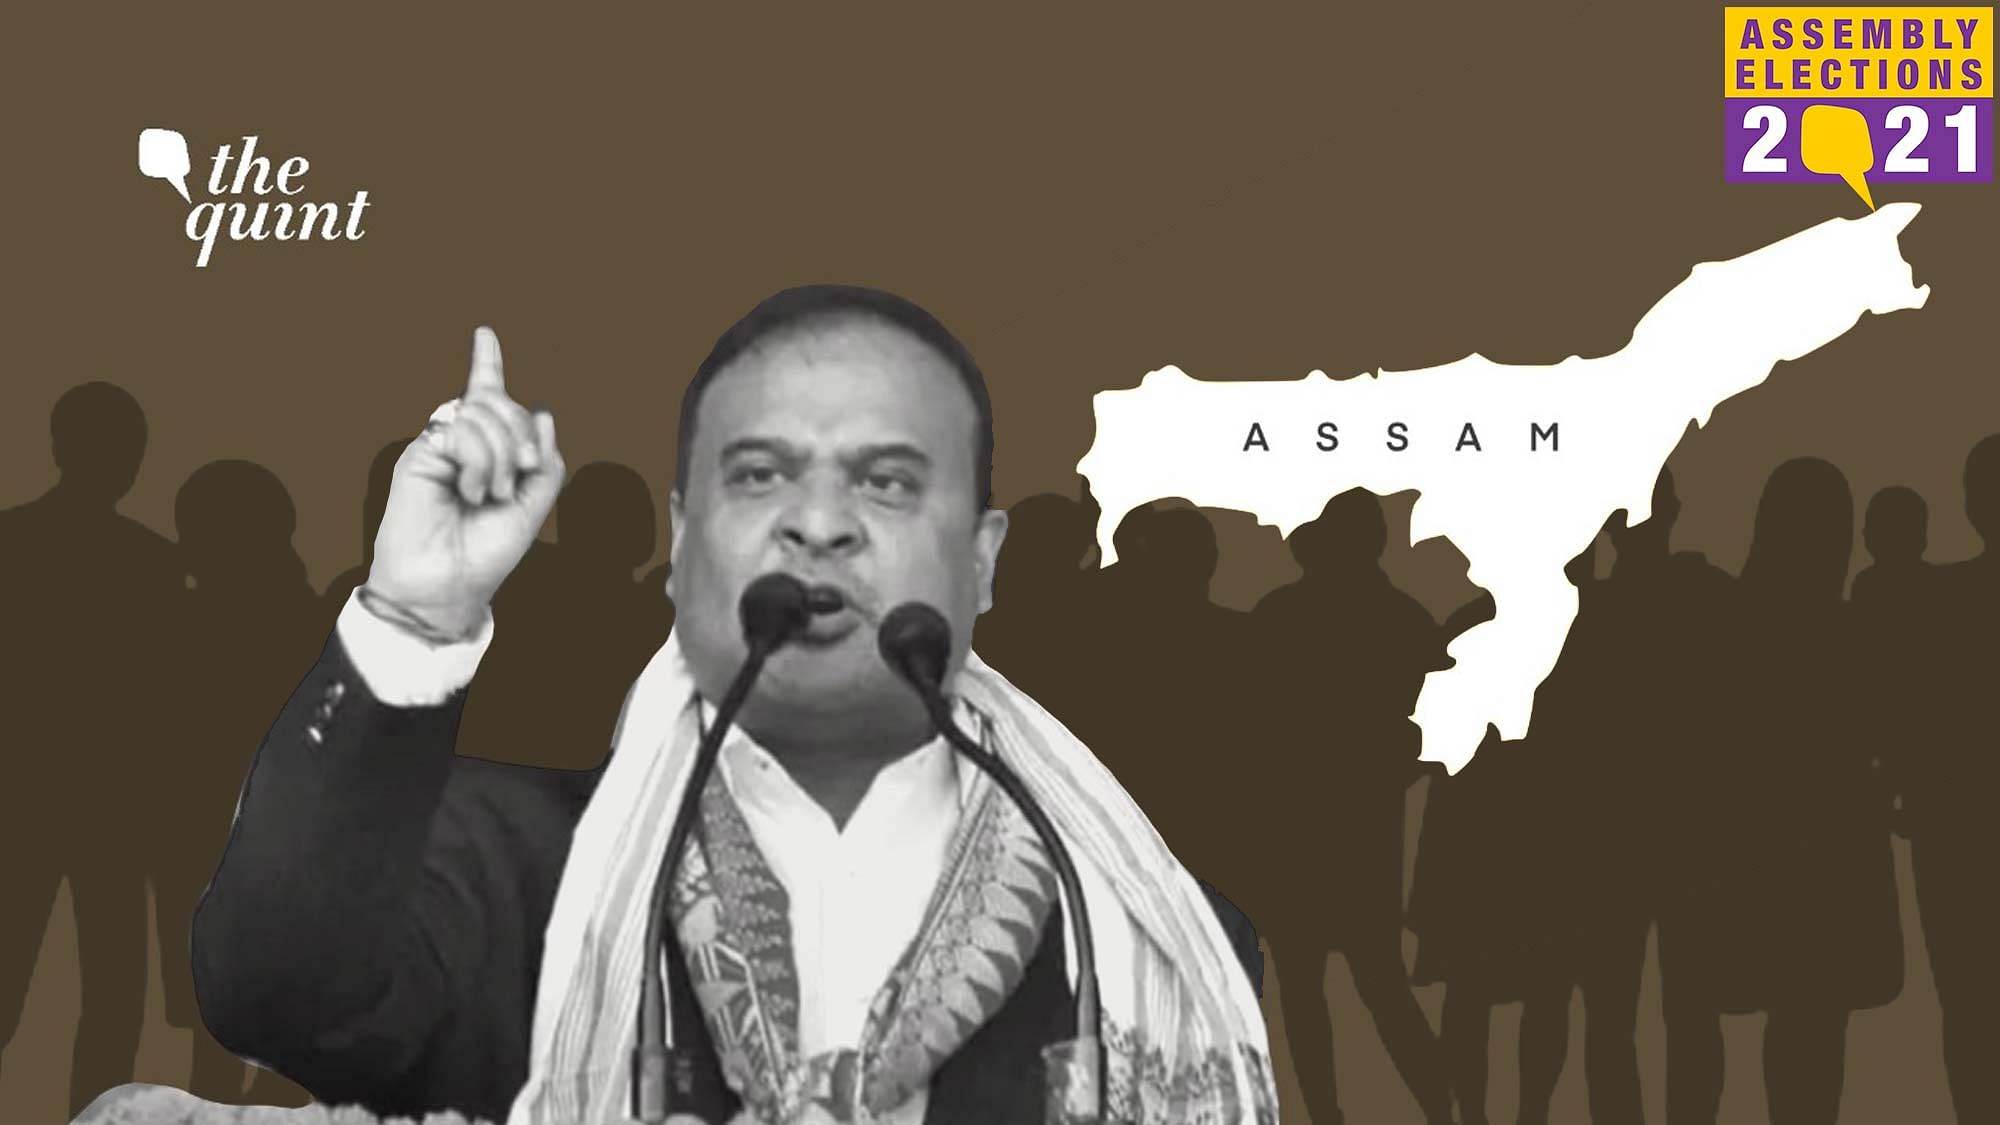 Himanta Biswa Sarma is being accused of making communal statements targetting Muslims in the Assam election campaign